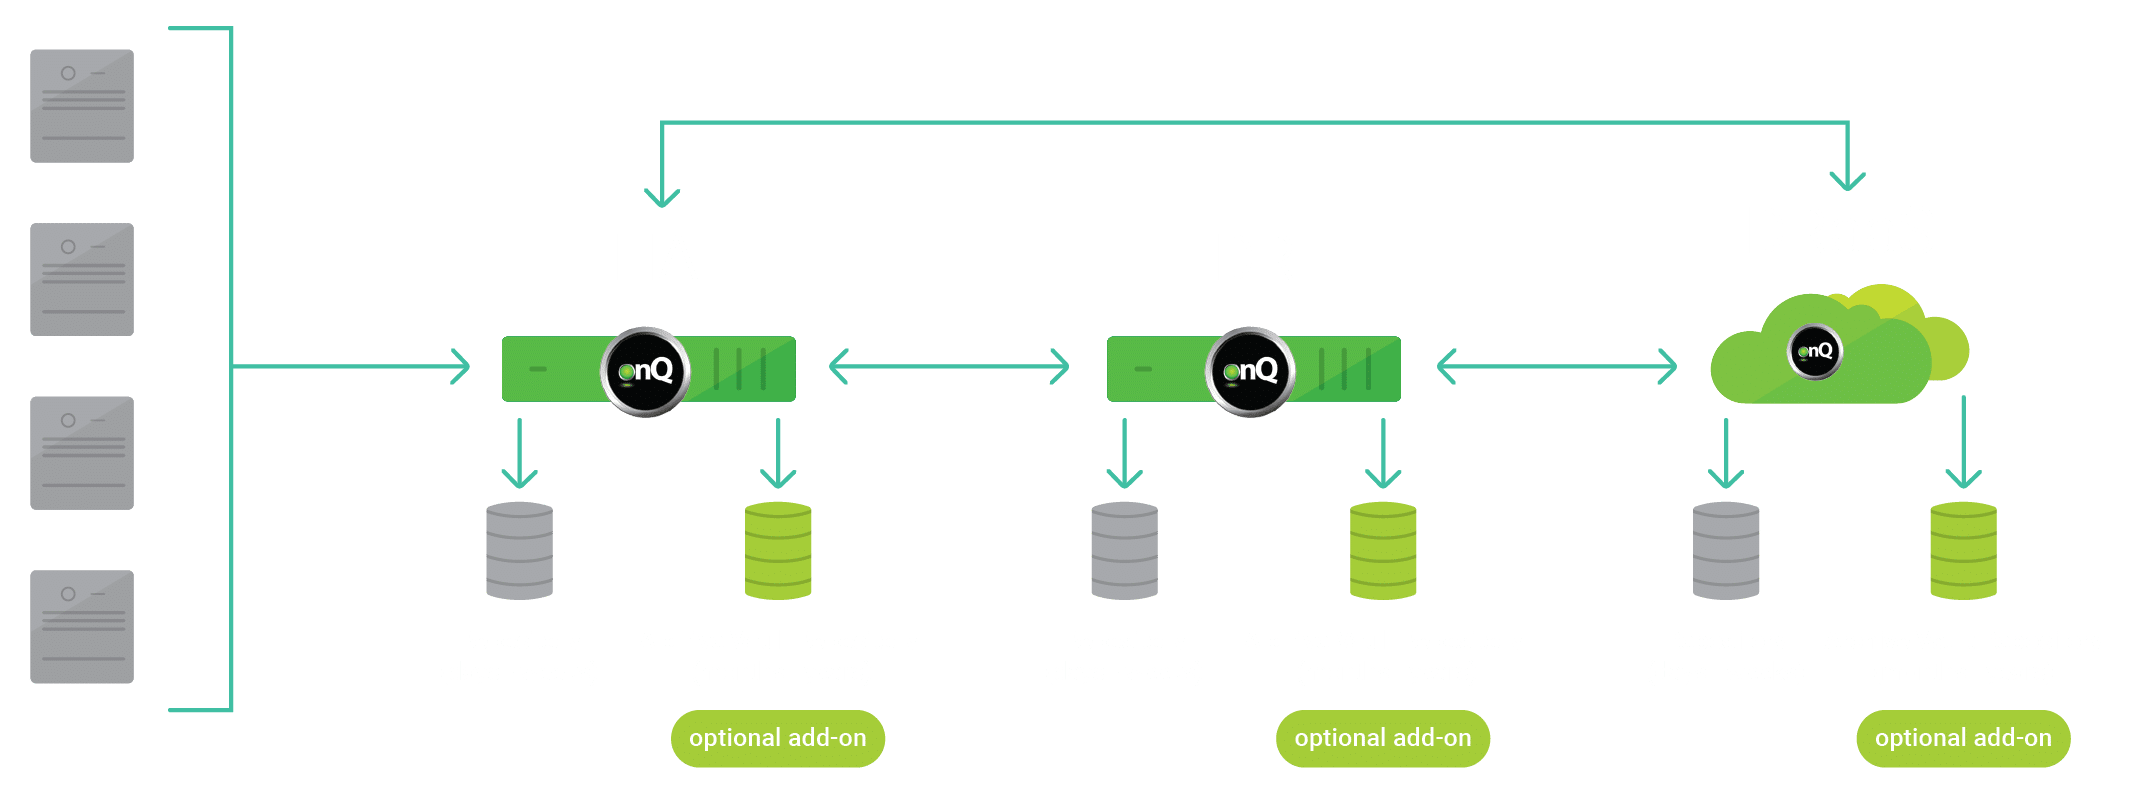 A flowchart illustrating data backup and recovery processes. It shows data being transferred to three components: HA (High Availability), DR (Disaster Recovery), and DRaaS (Disaster Recovery as a Service), each with options for Archive Vault Repository add-ons.